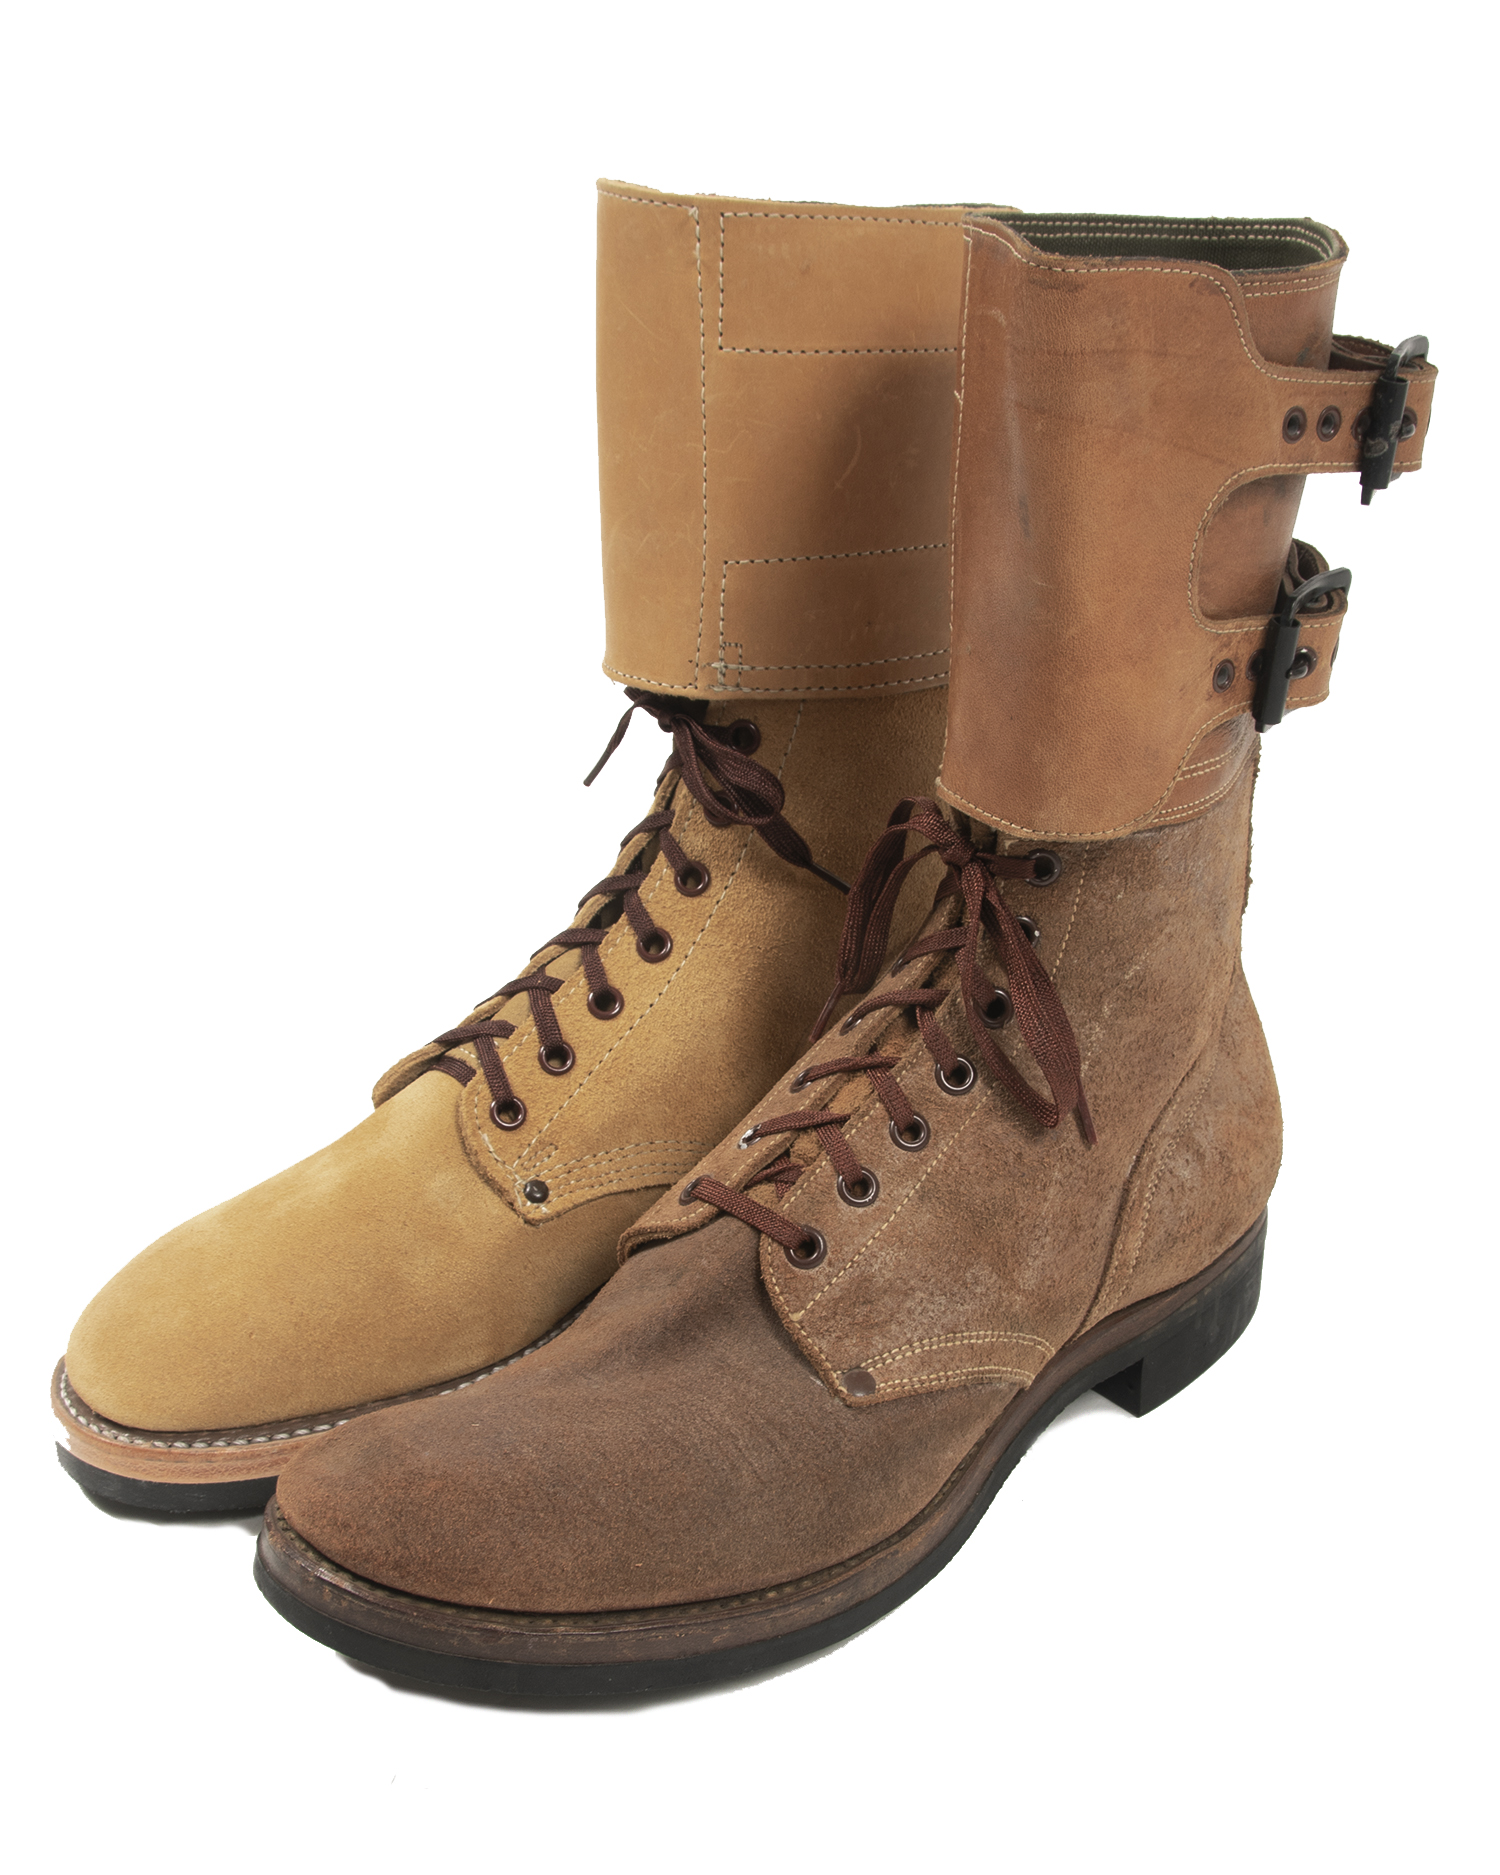 Reproduction Combat Service Boots, made in USA | ATF